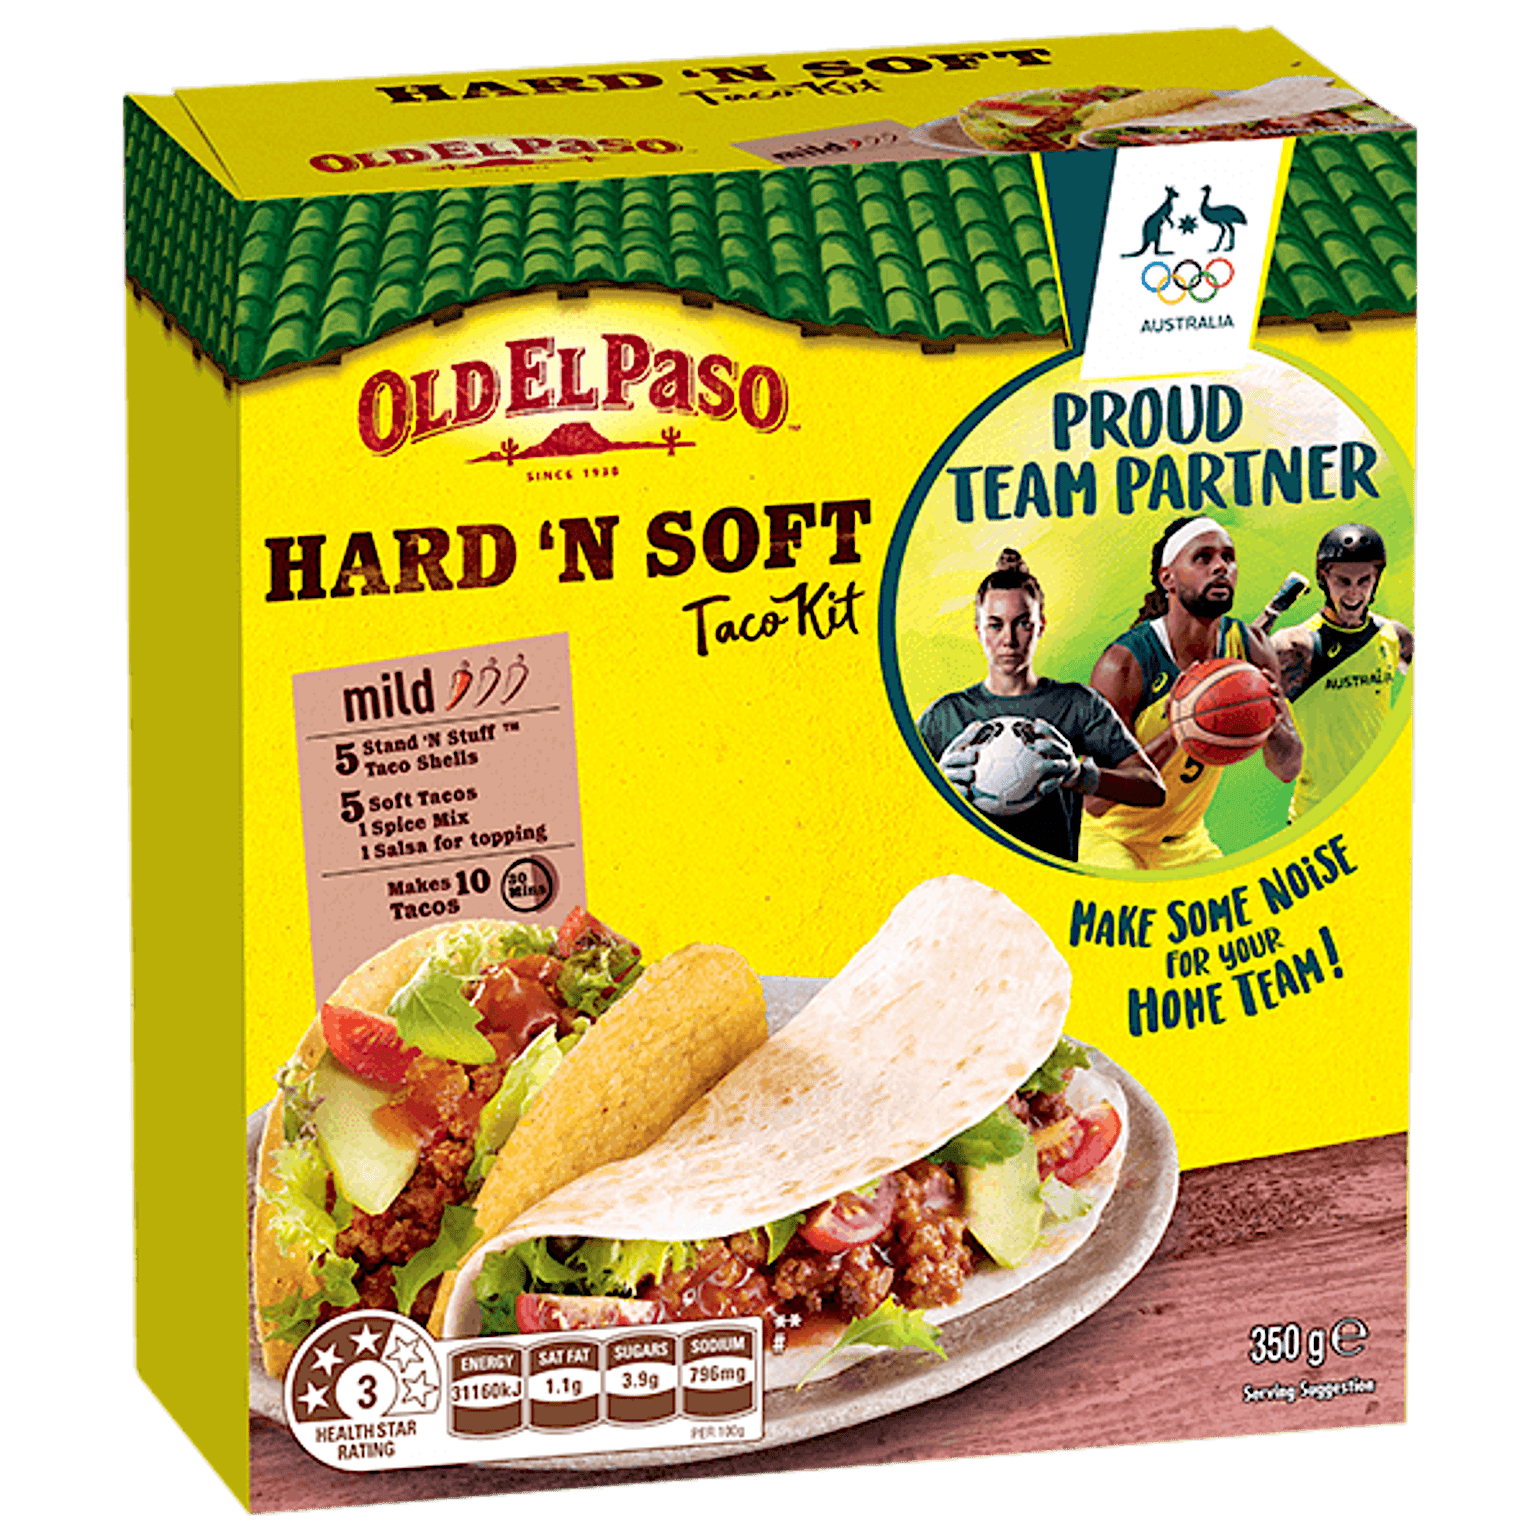 a pack of Old El Paso's hard & soft taco kit mild containing taco shells, soft tacos, spice mix & salsa for topping (350g)